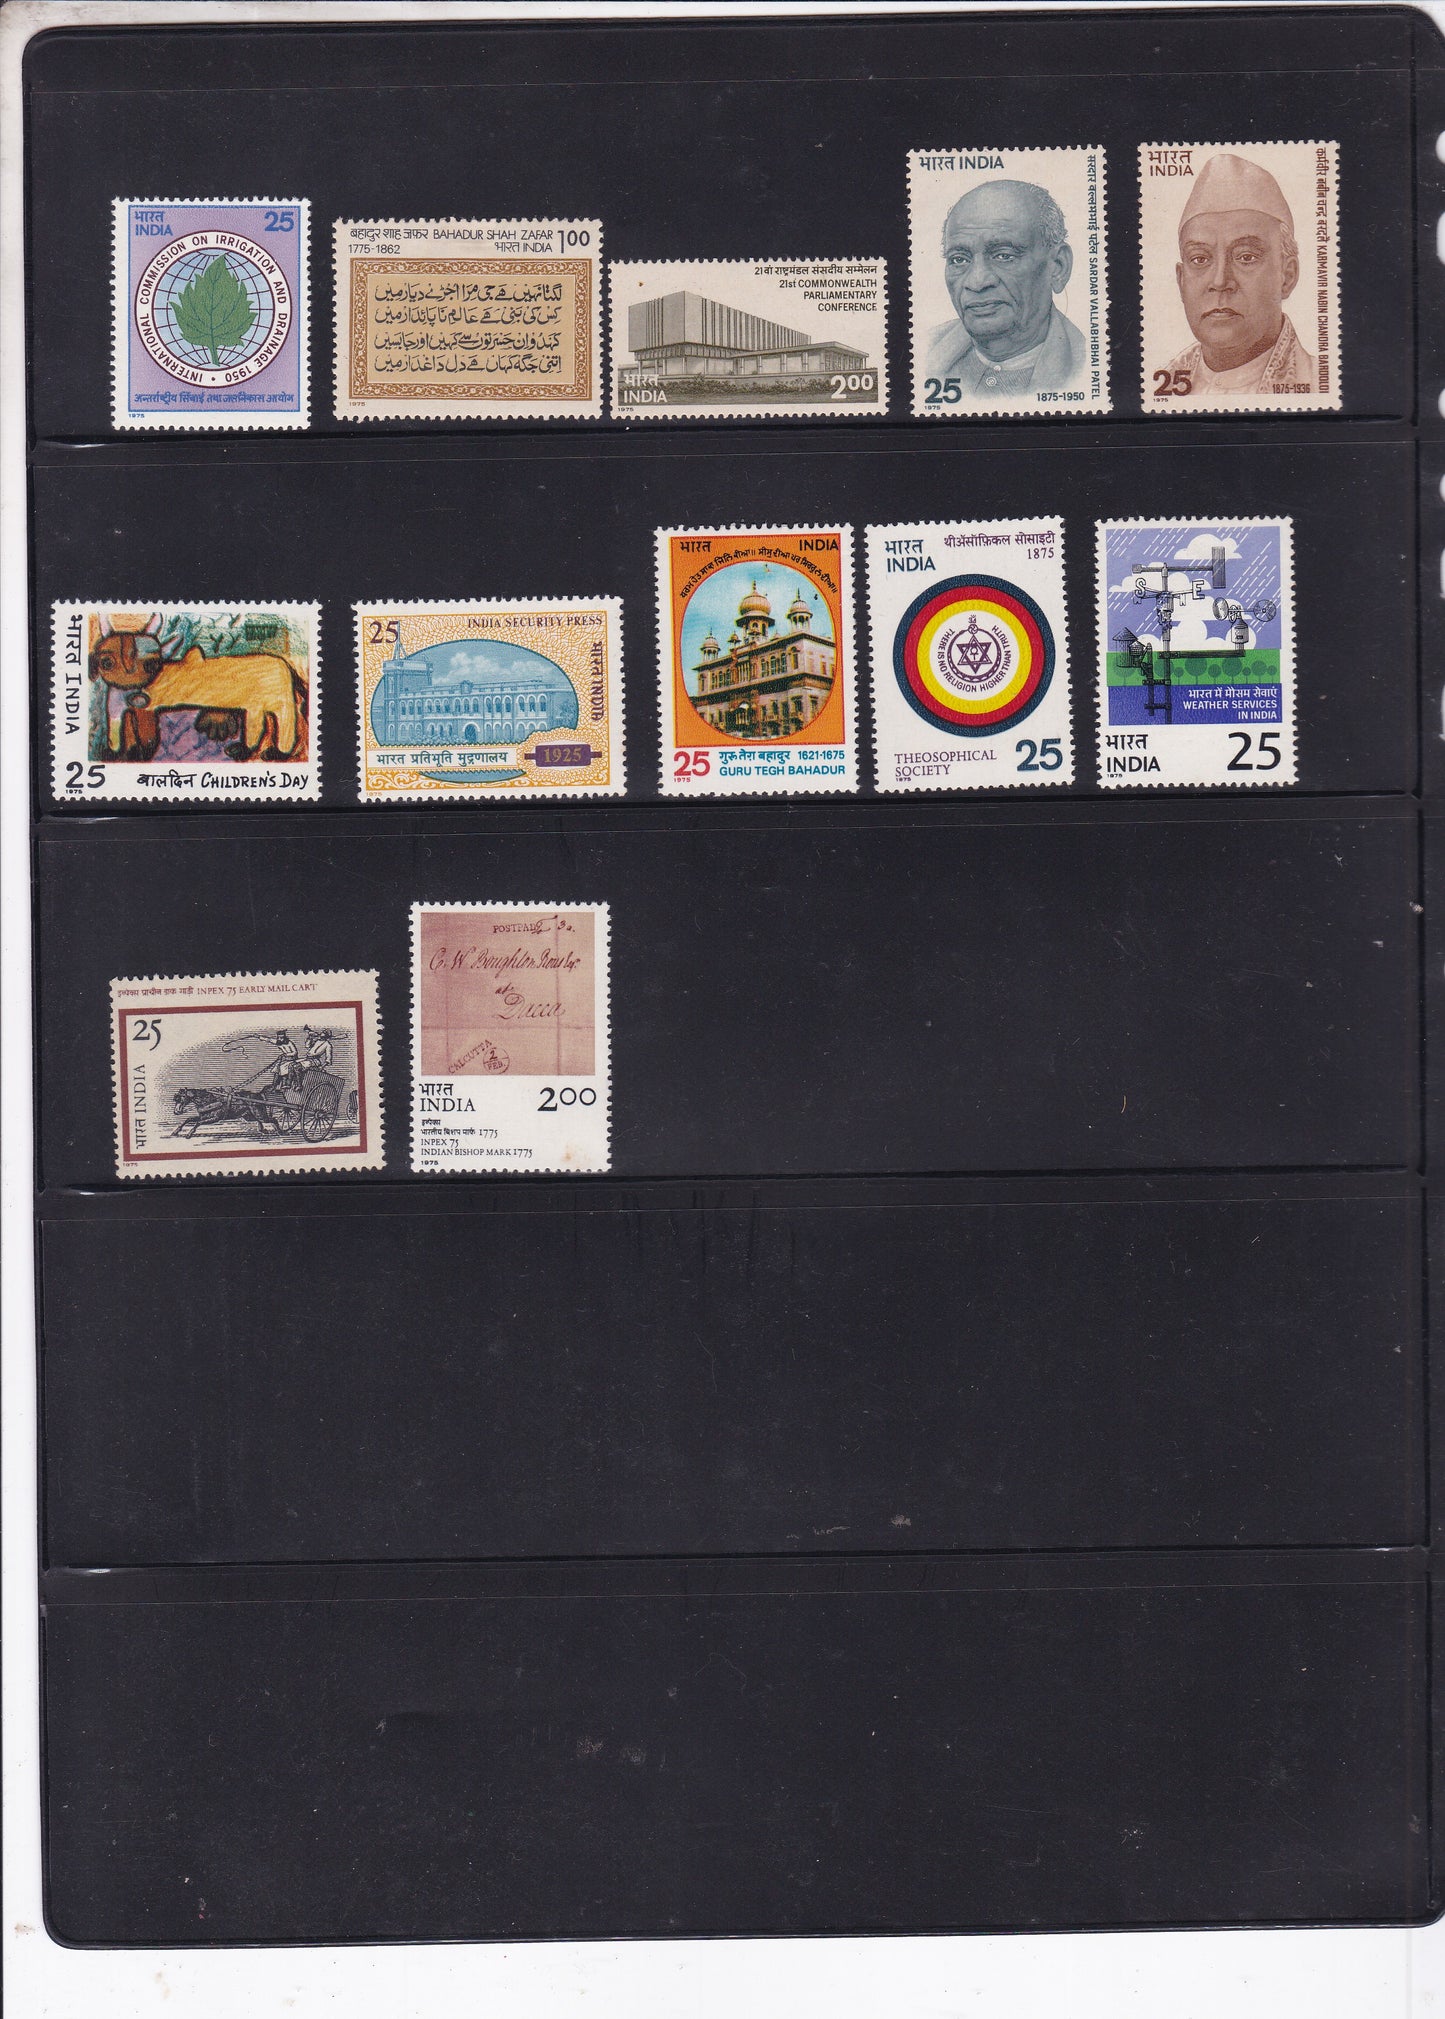 India-1975 Full Year pack MNH Stamps